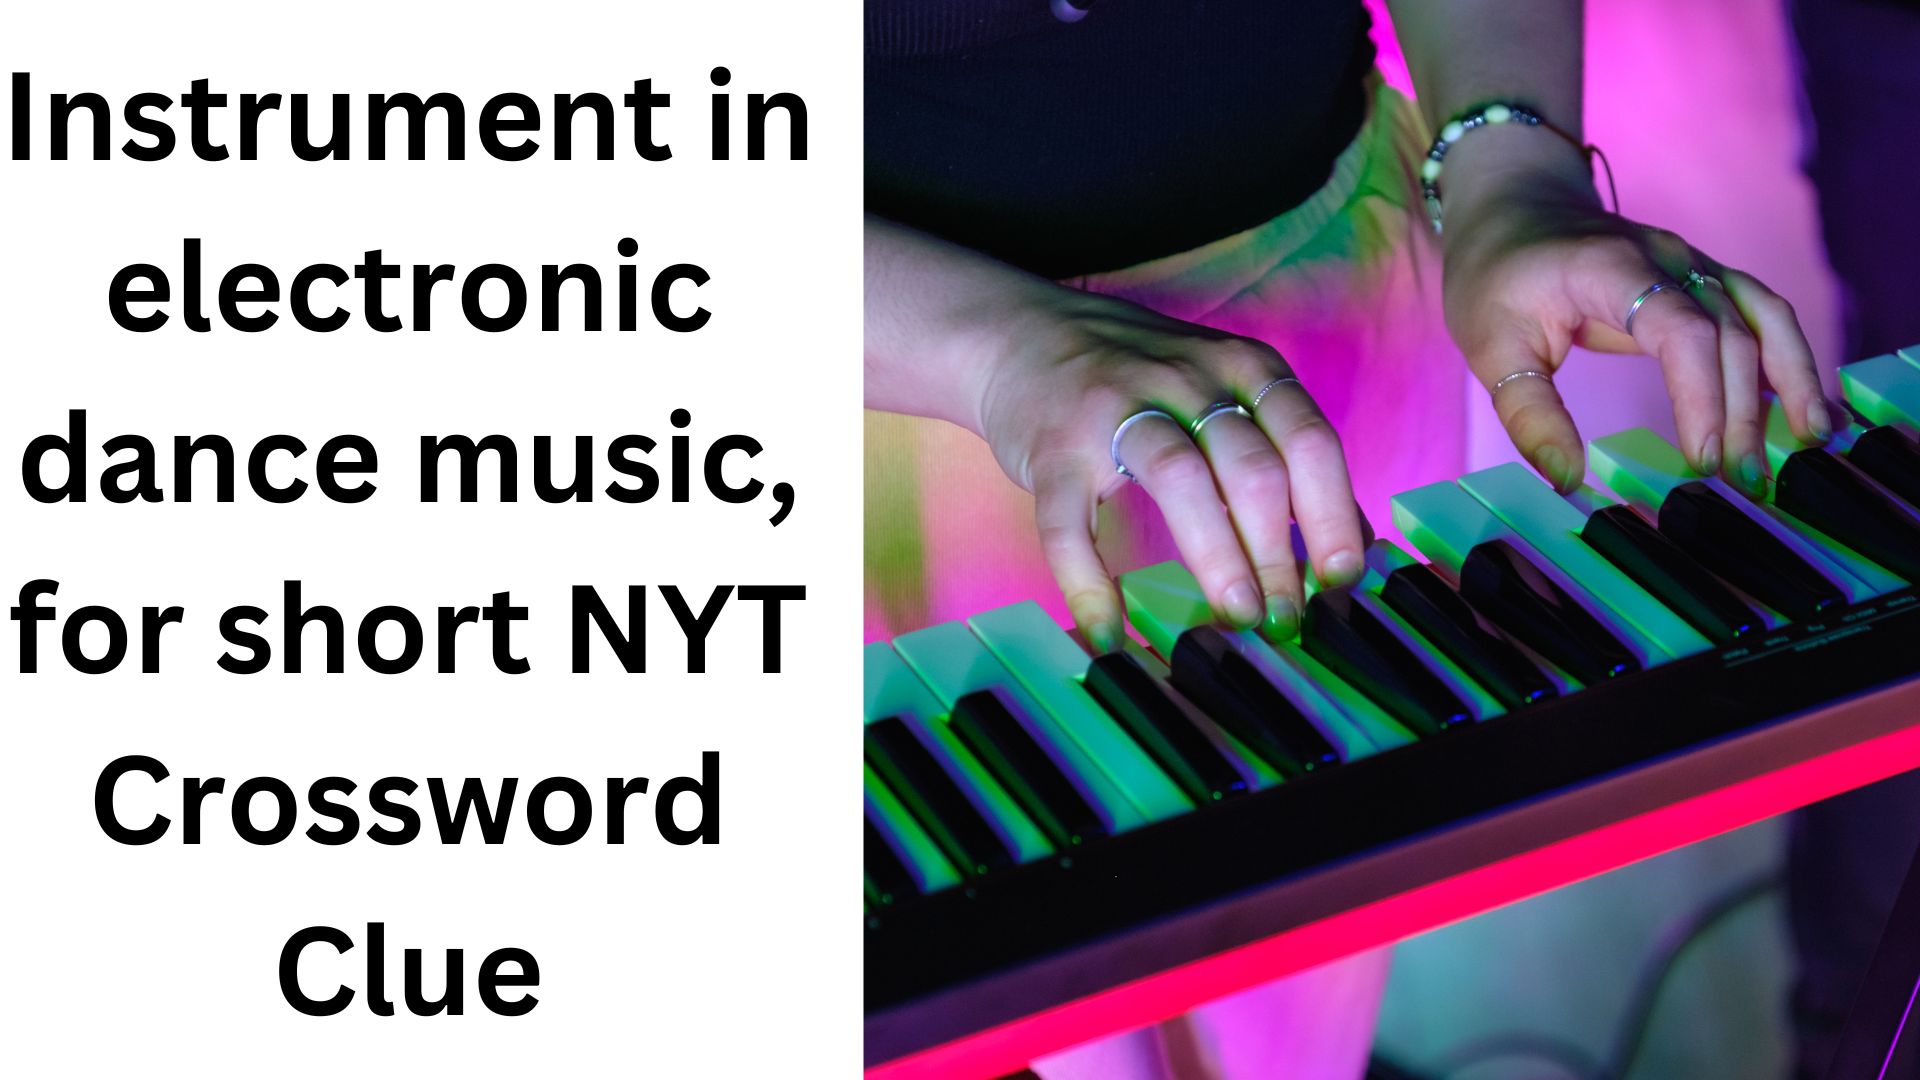 Instrument in electronic dance music, for short NYT Crossword Clue